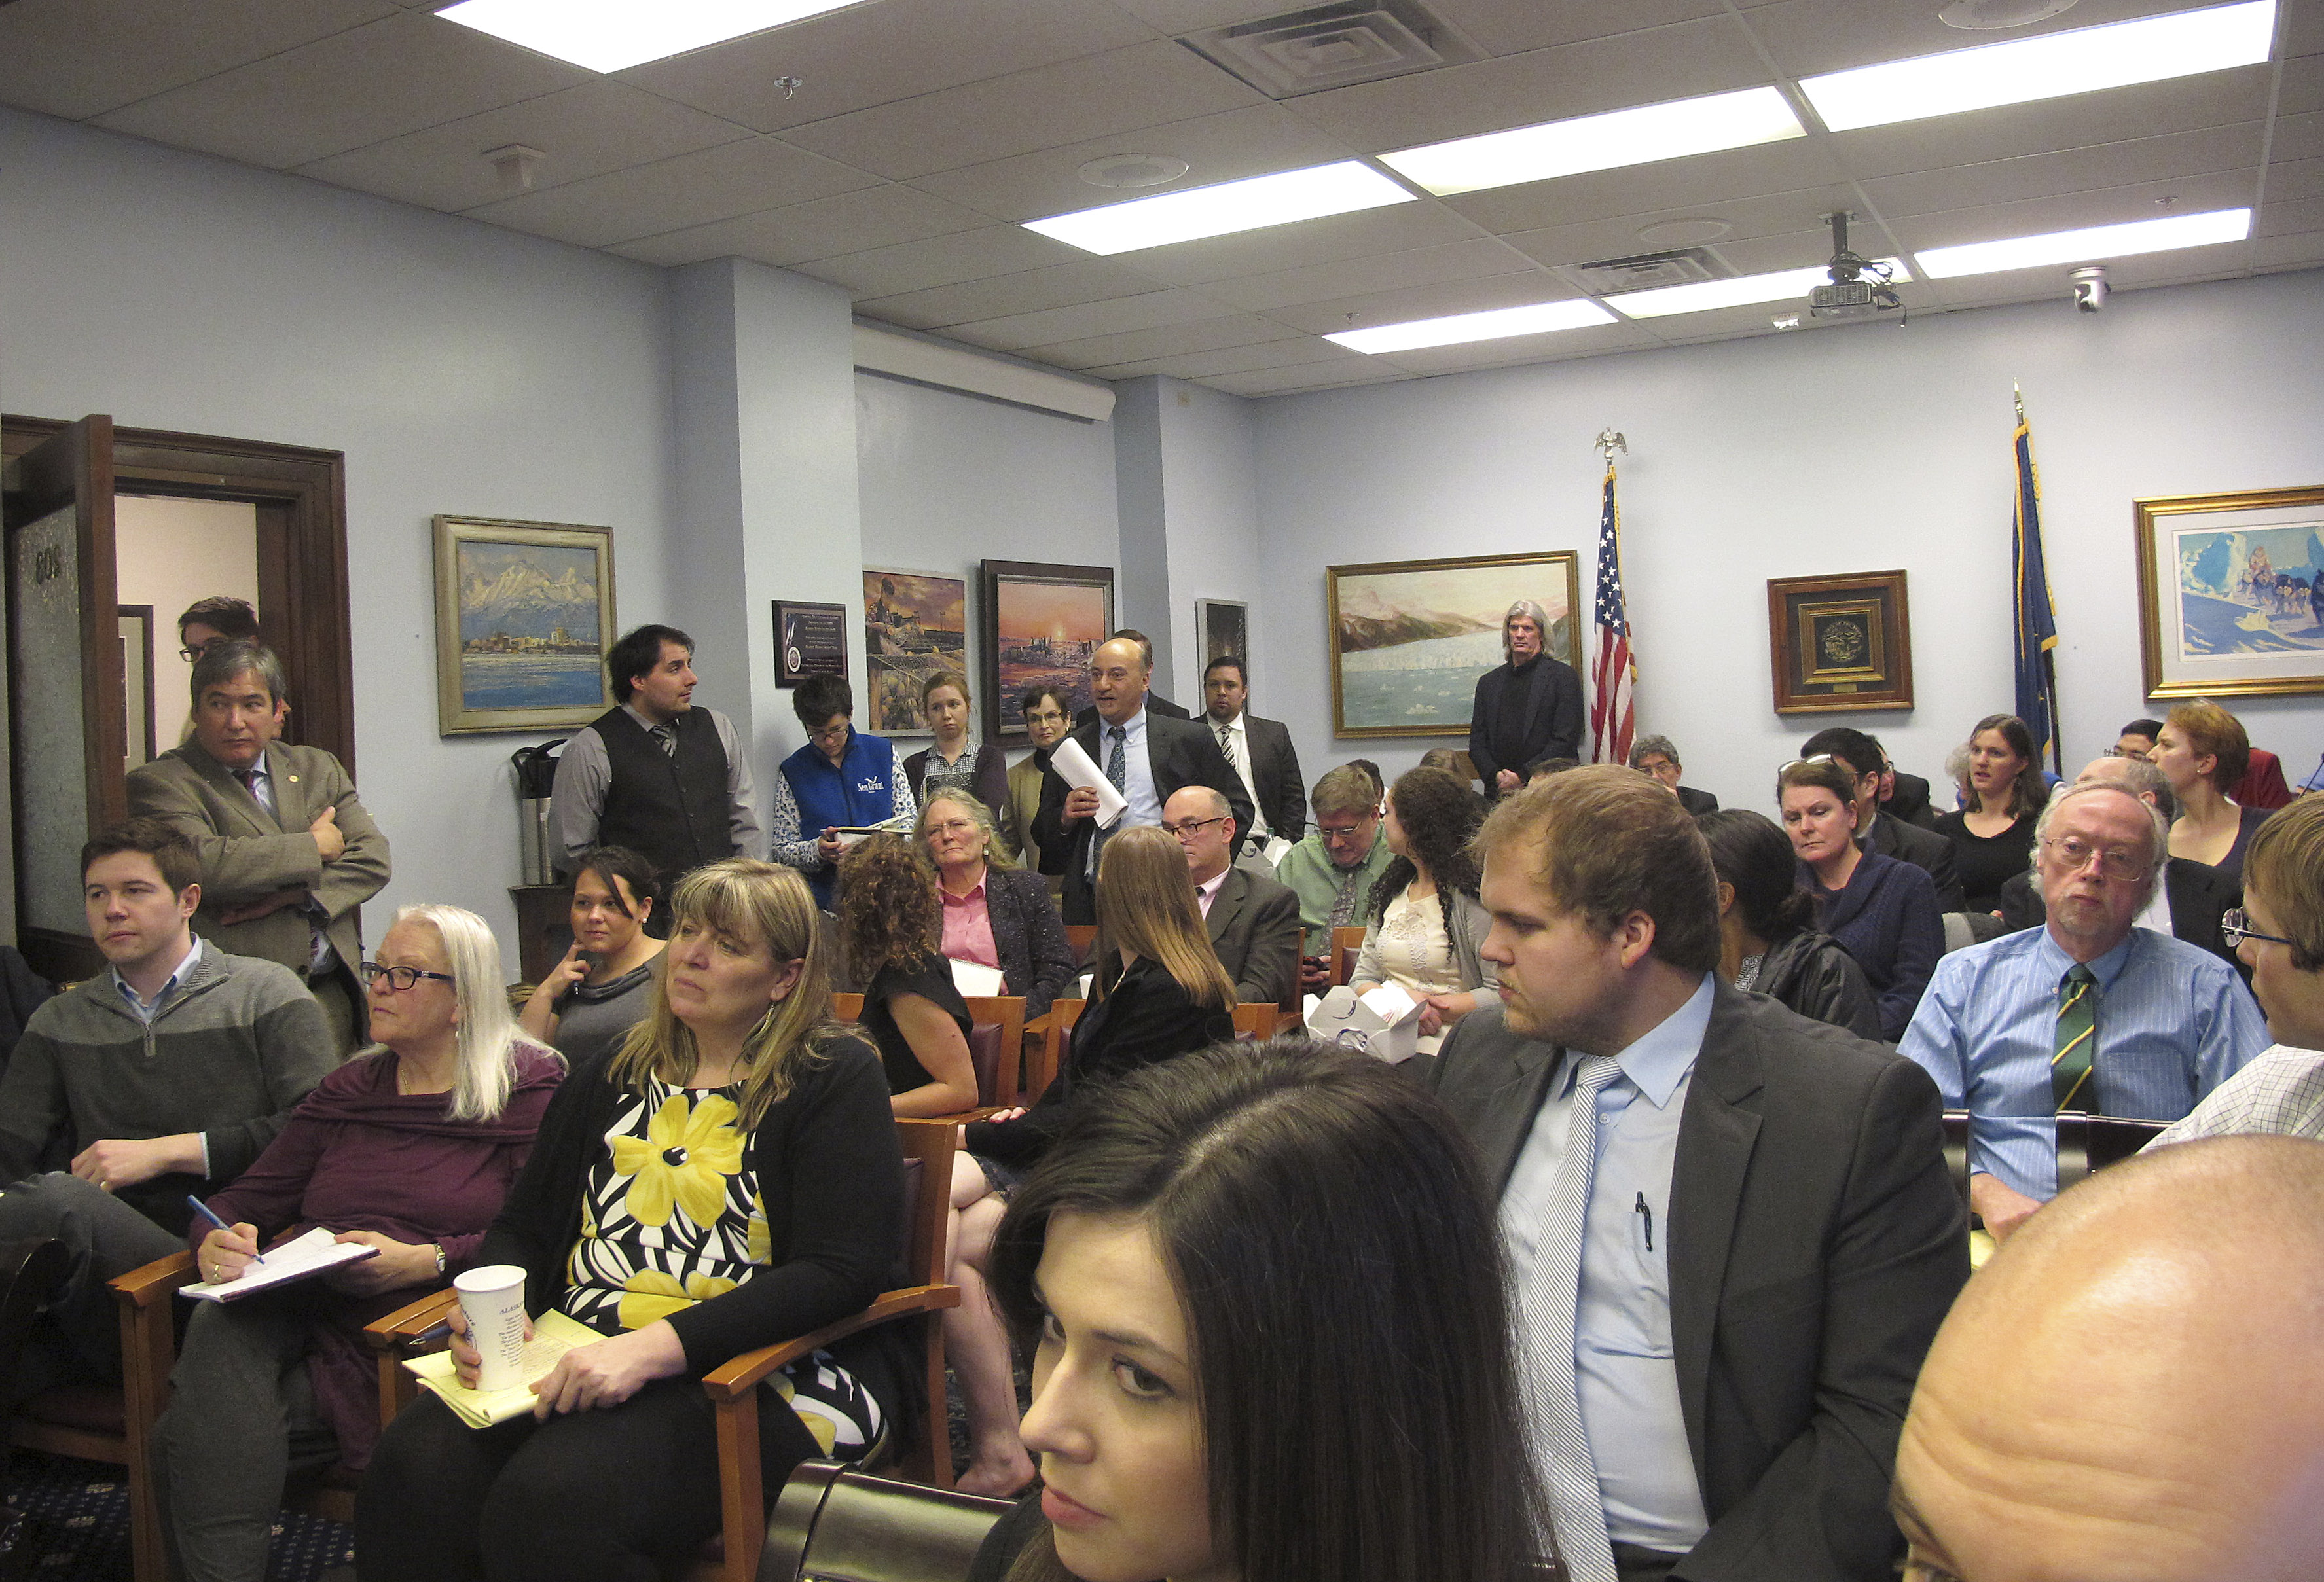 In this March 4, 2015 photo, a large audience assembles at the state Capitol to hear a Lunch and Learn presentation on Medicaid expansion, including state legislators, aides and others, in Juneau, Alaska.